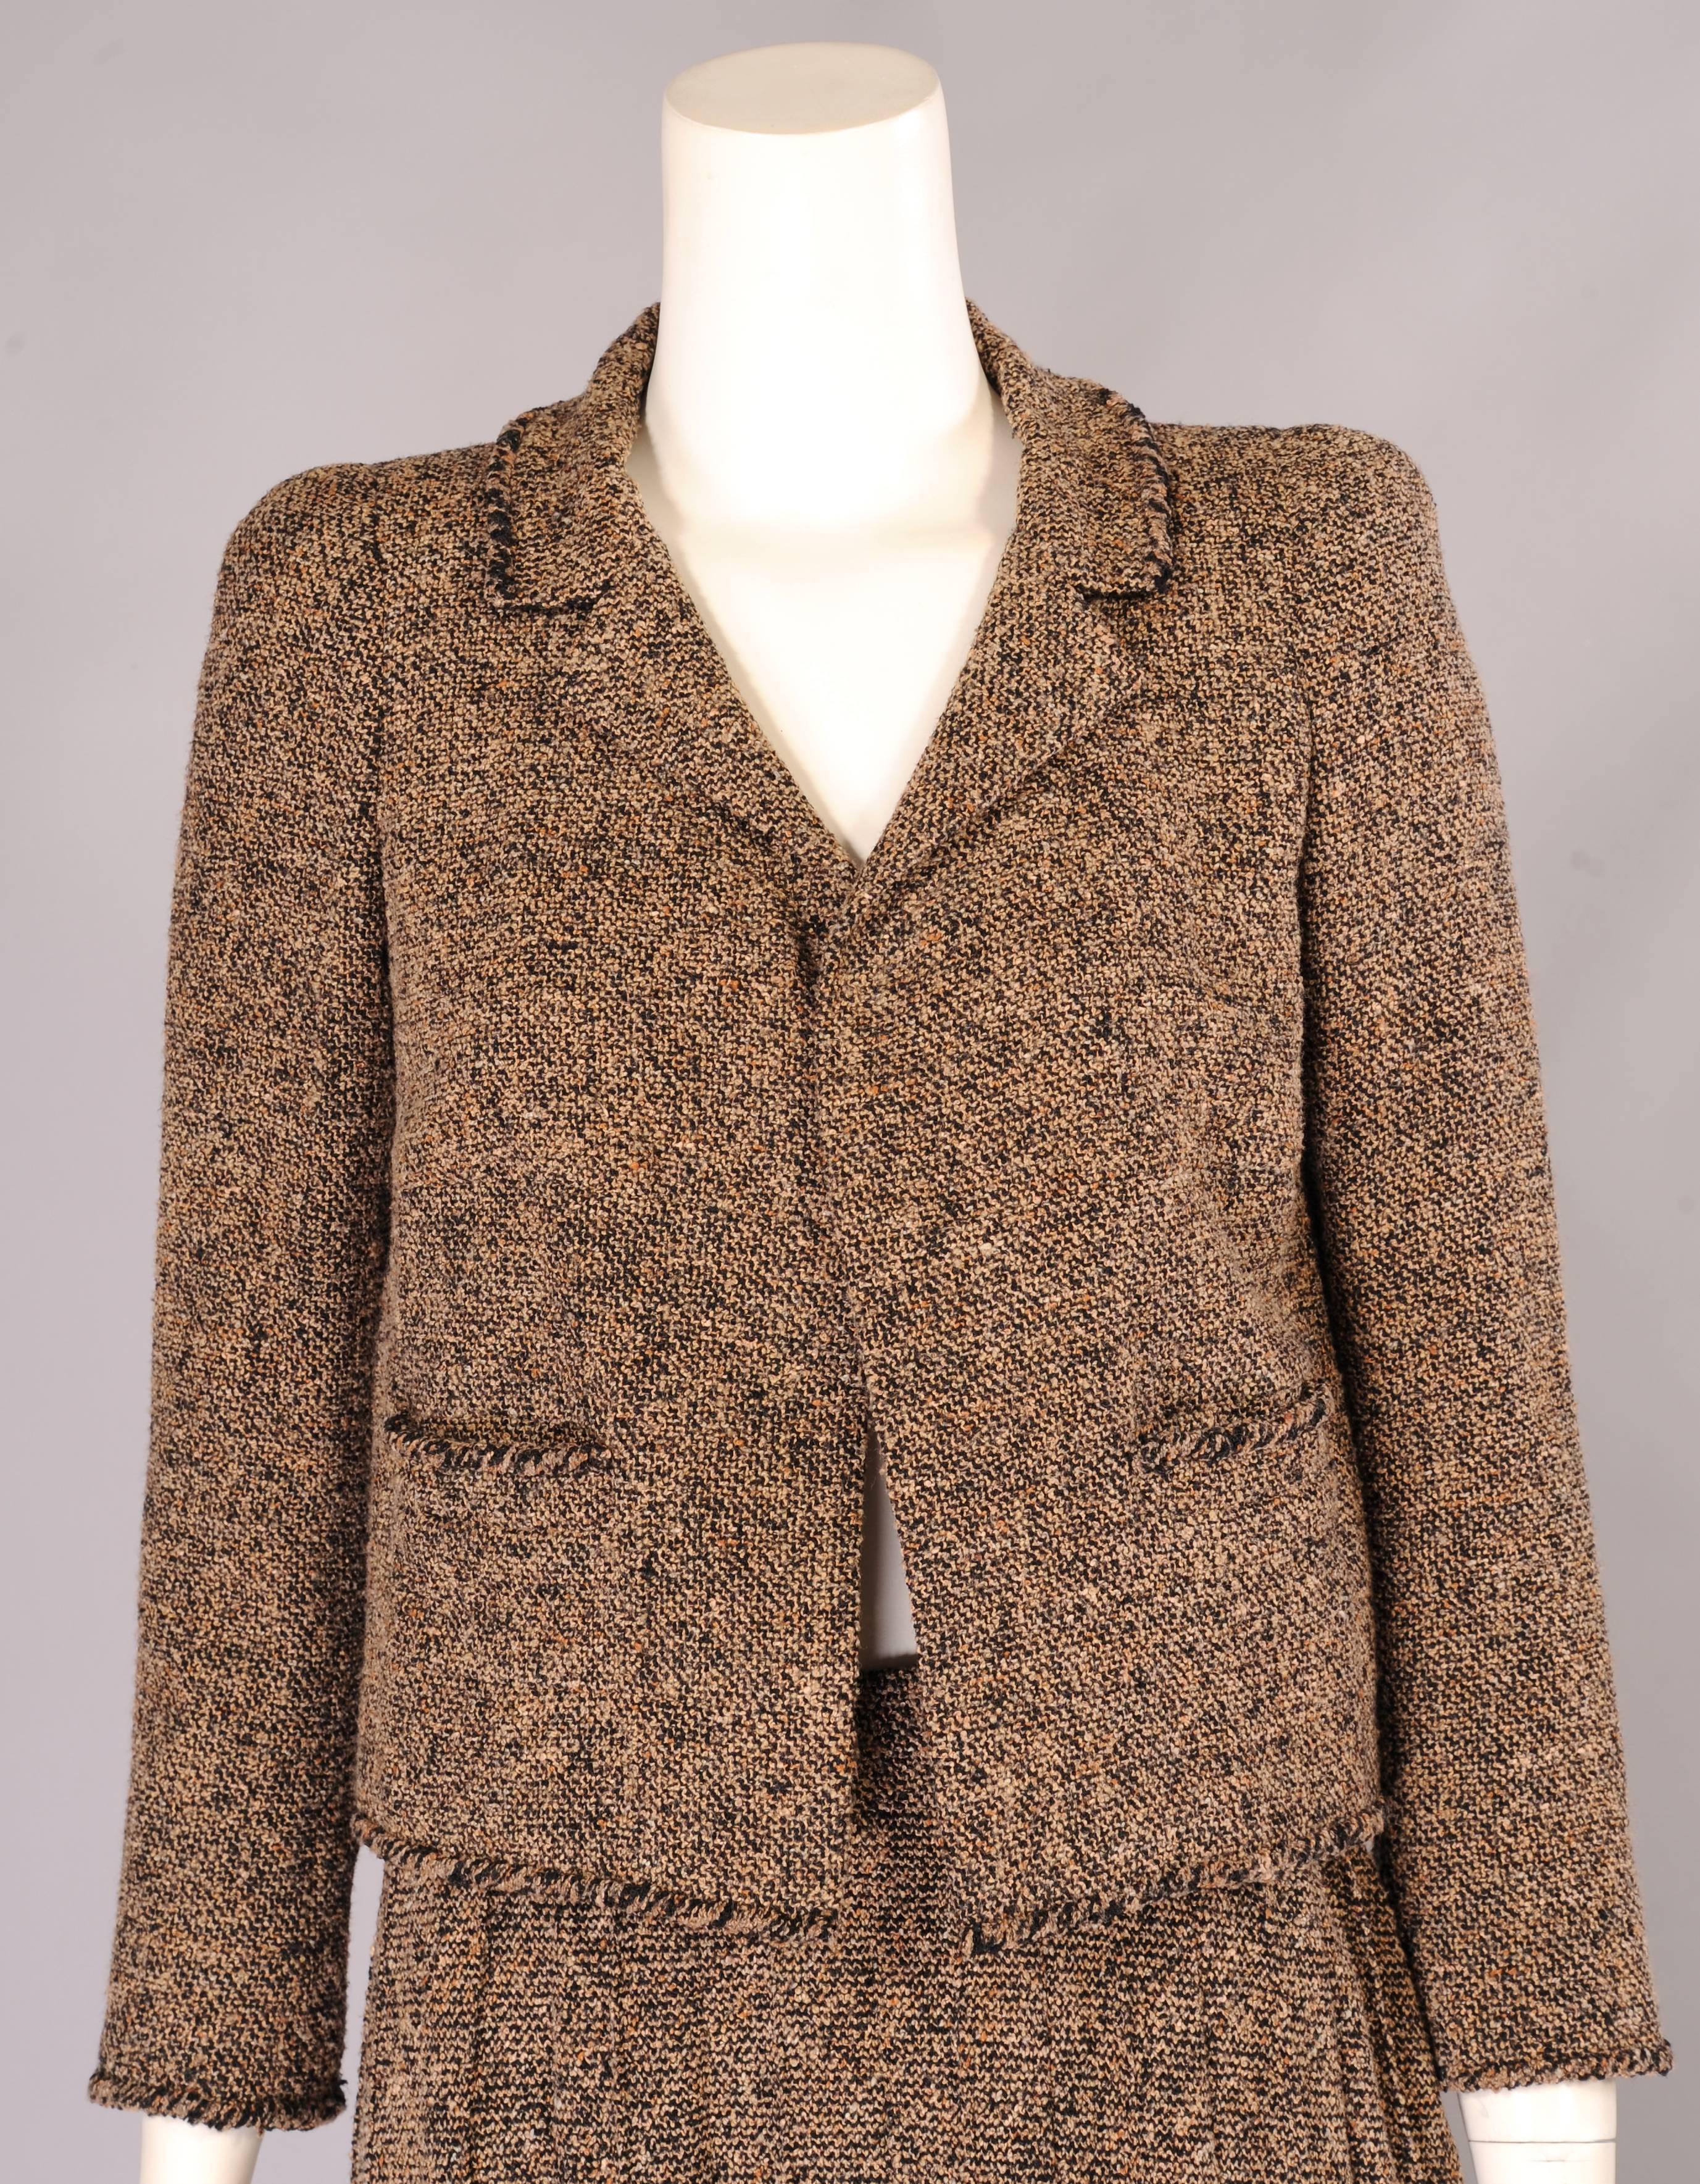 whose creation is the iconic boxy suit in tweed with braid trims